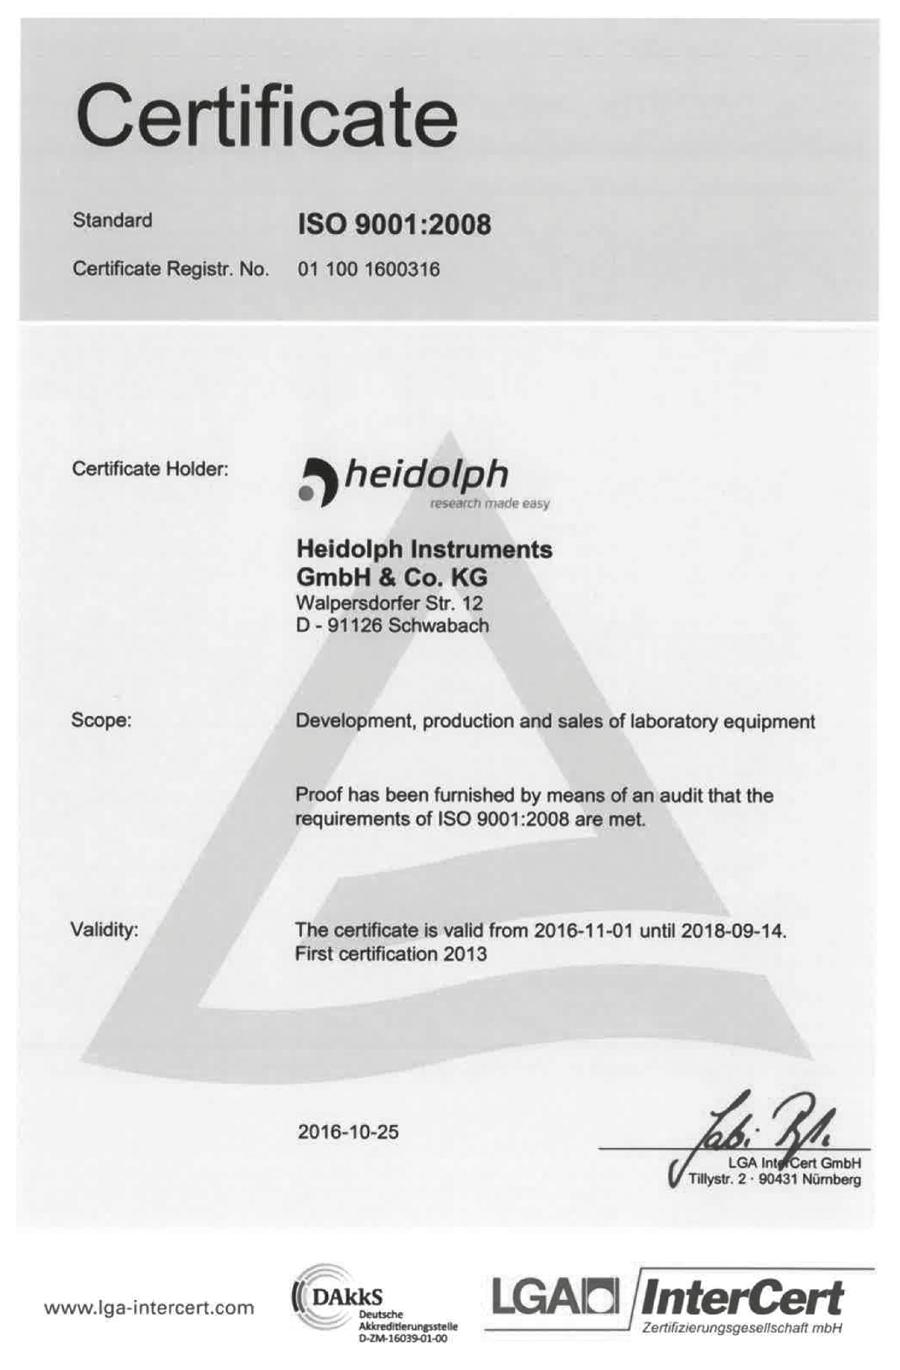 ISO Certificate Your Contacts at Heidolph North America Contact Information North America Sales Director Steve Drayer 248-941-2763 sdrayer@heidolph.